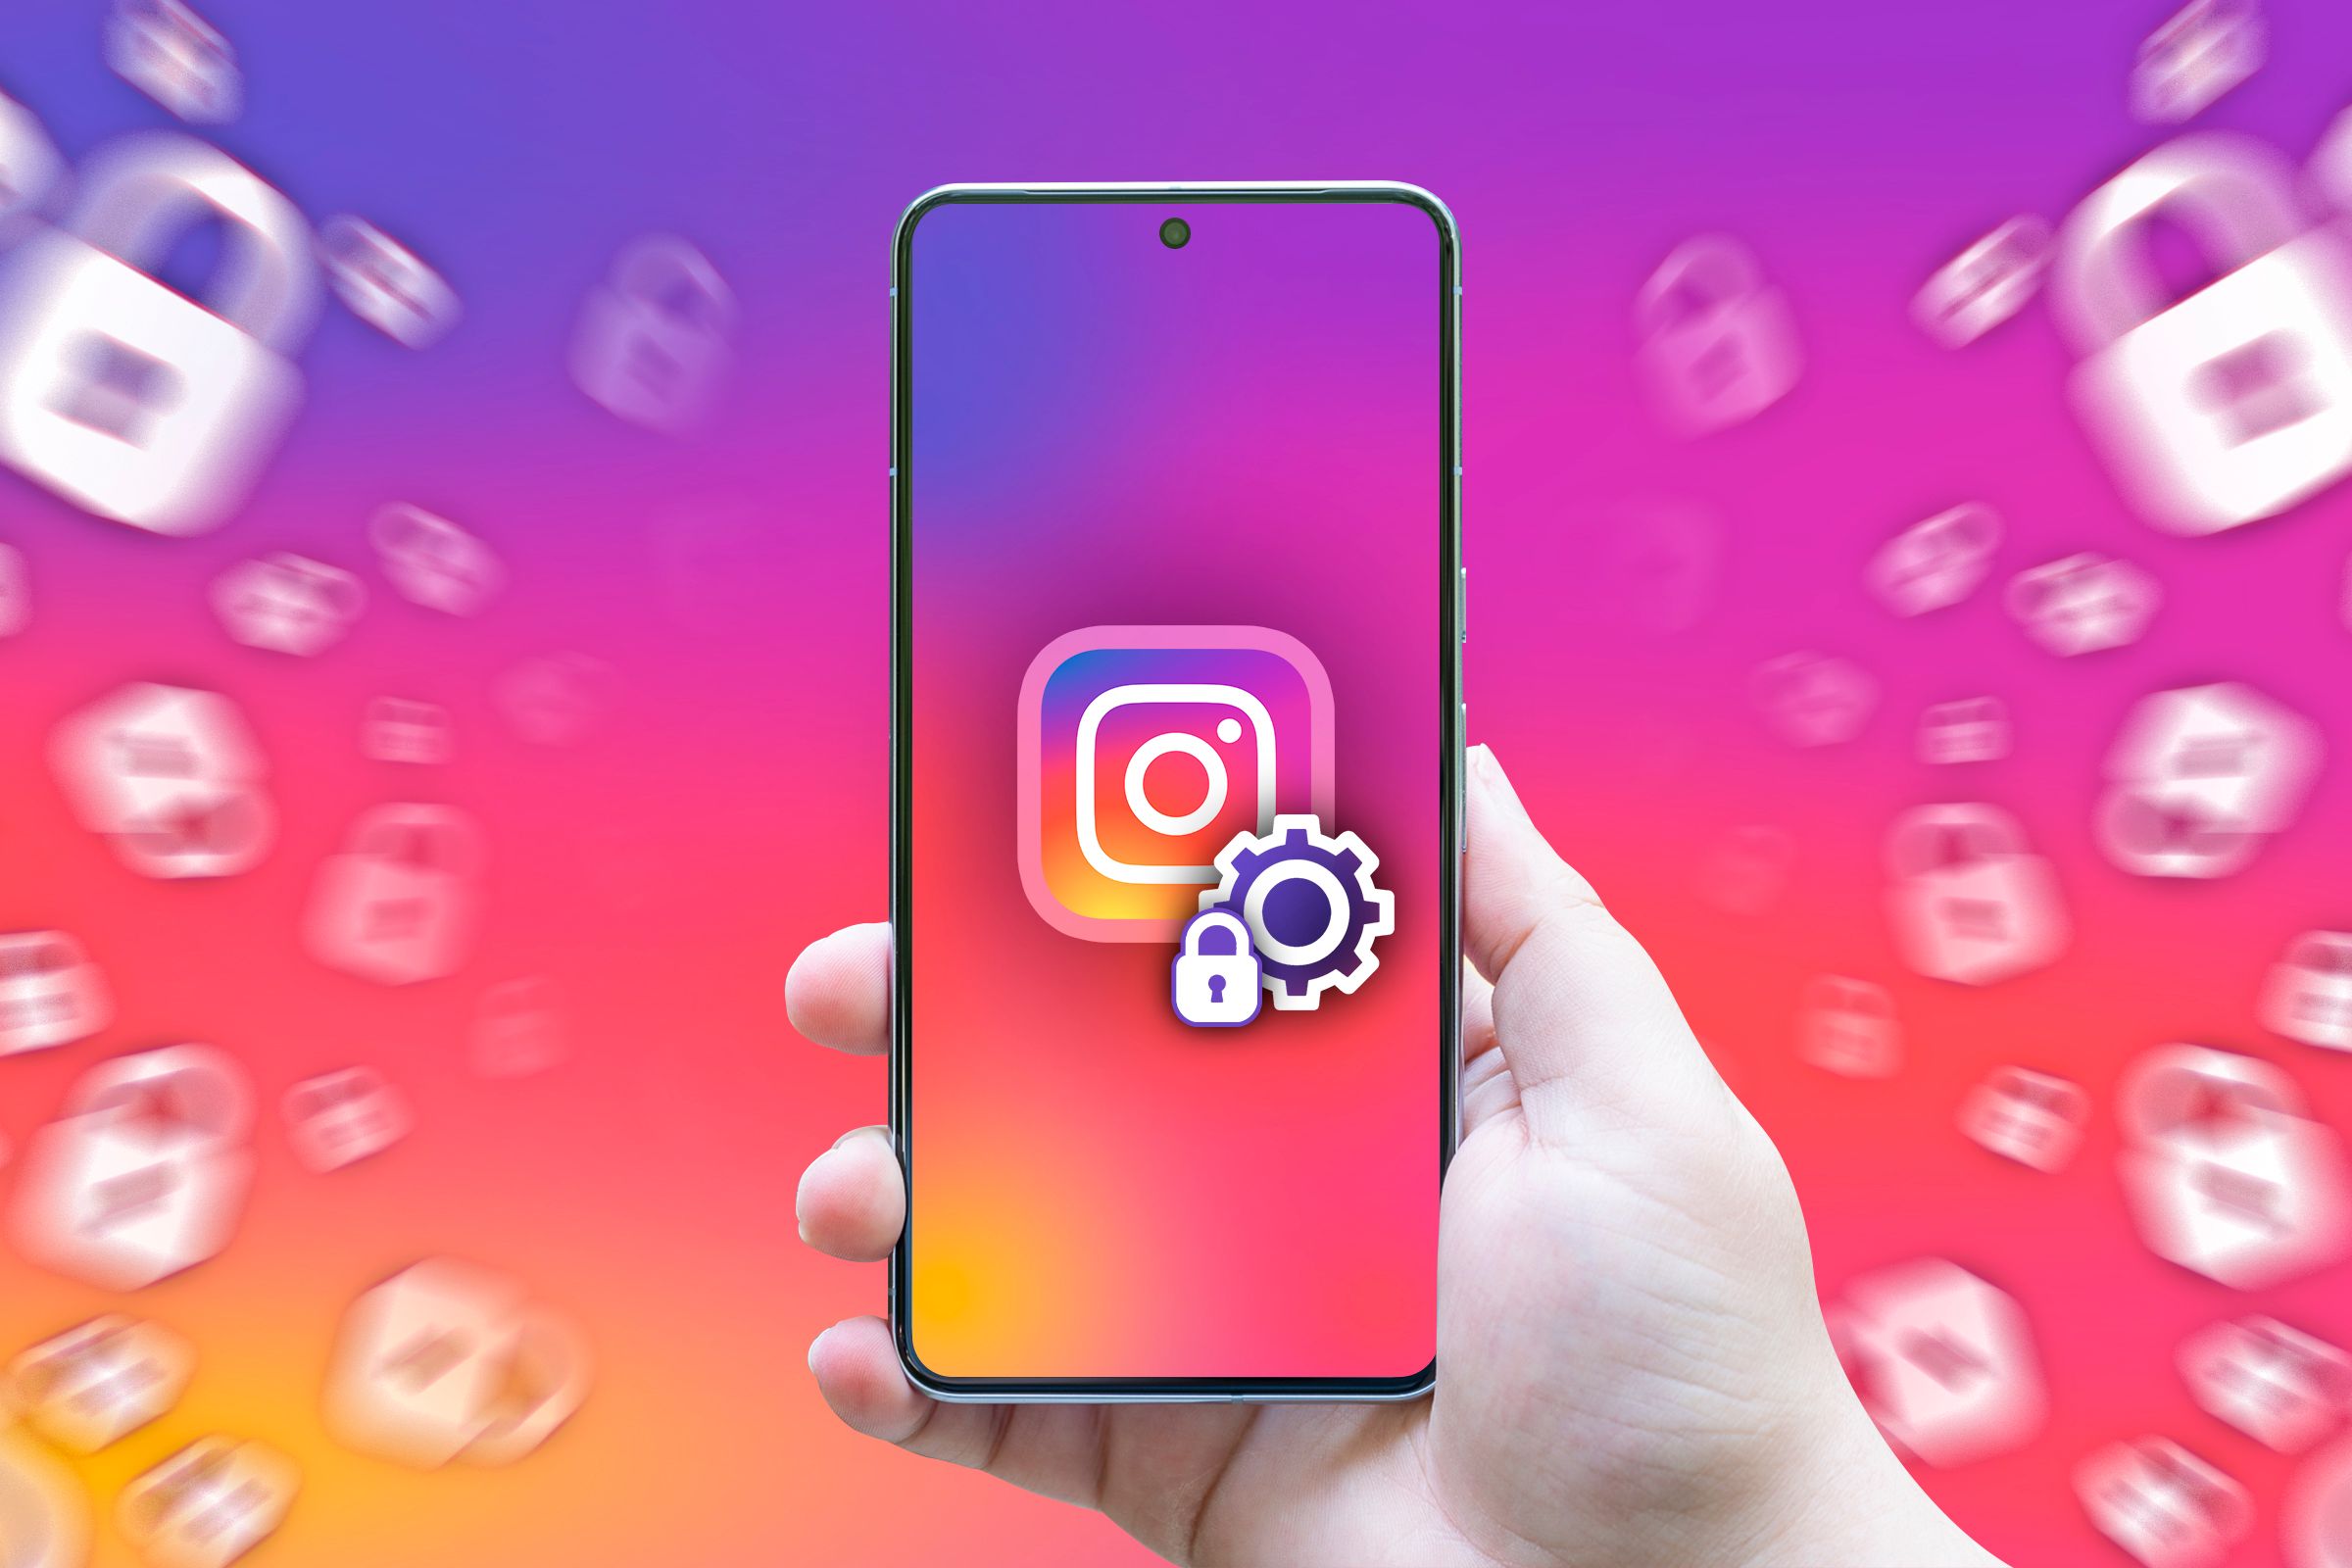 A hand holding a smartphone with the Instagram logo and a privacy settings icon.